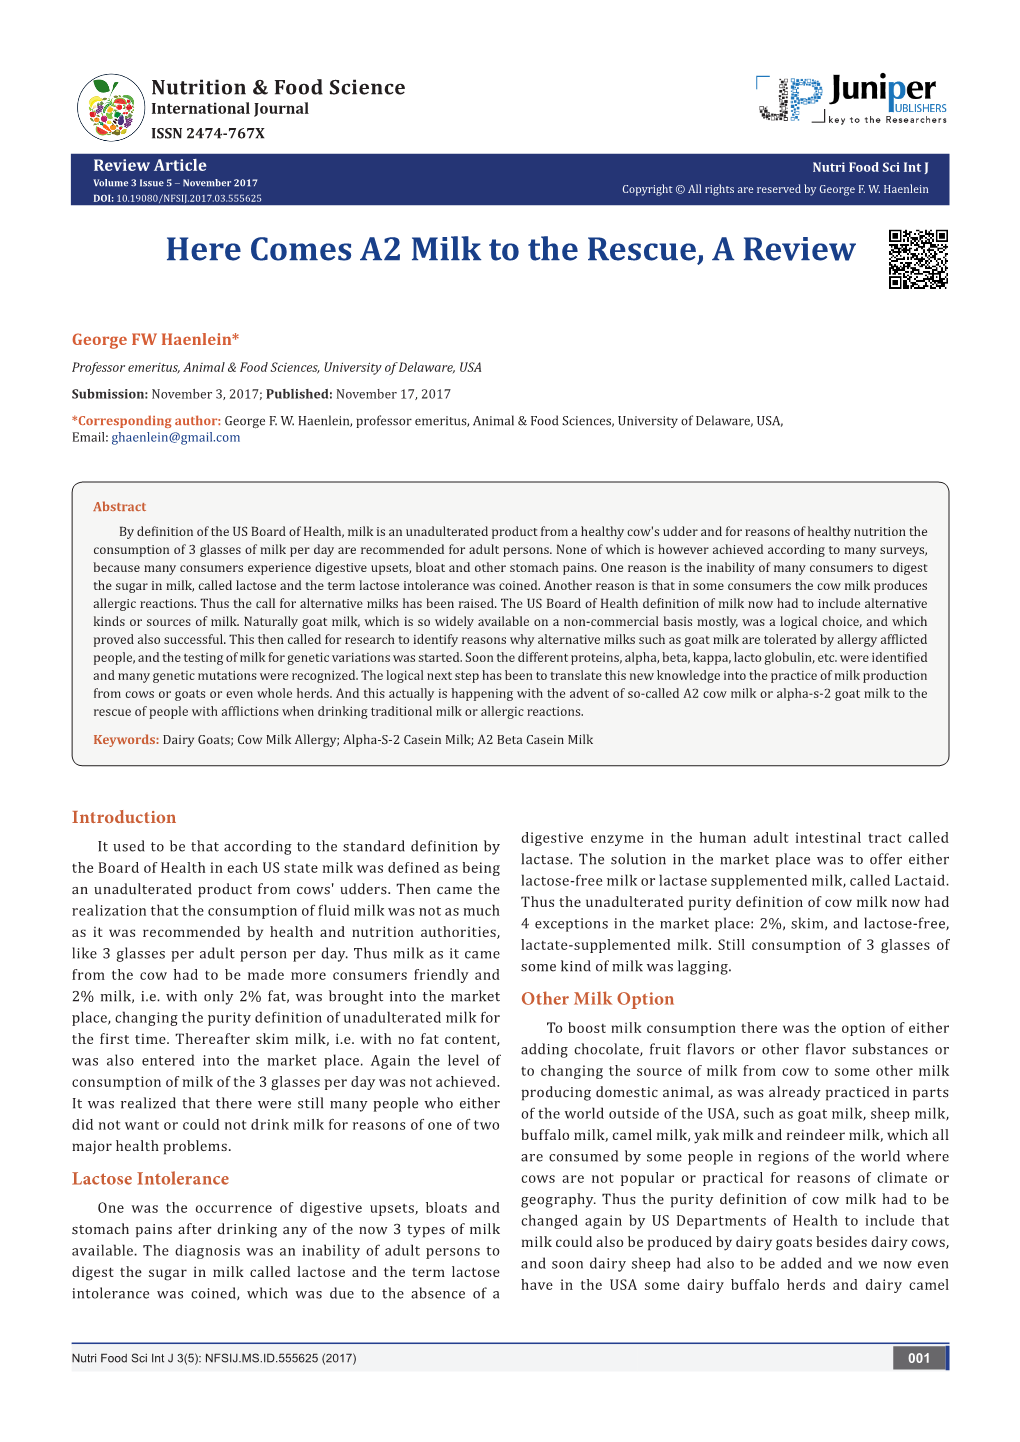 Here Comes A2 Milk to the Rescue, a Review